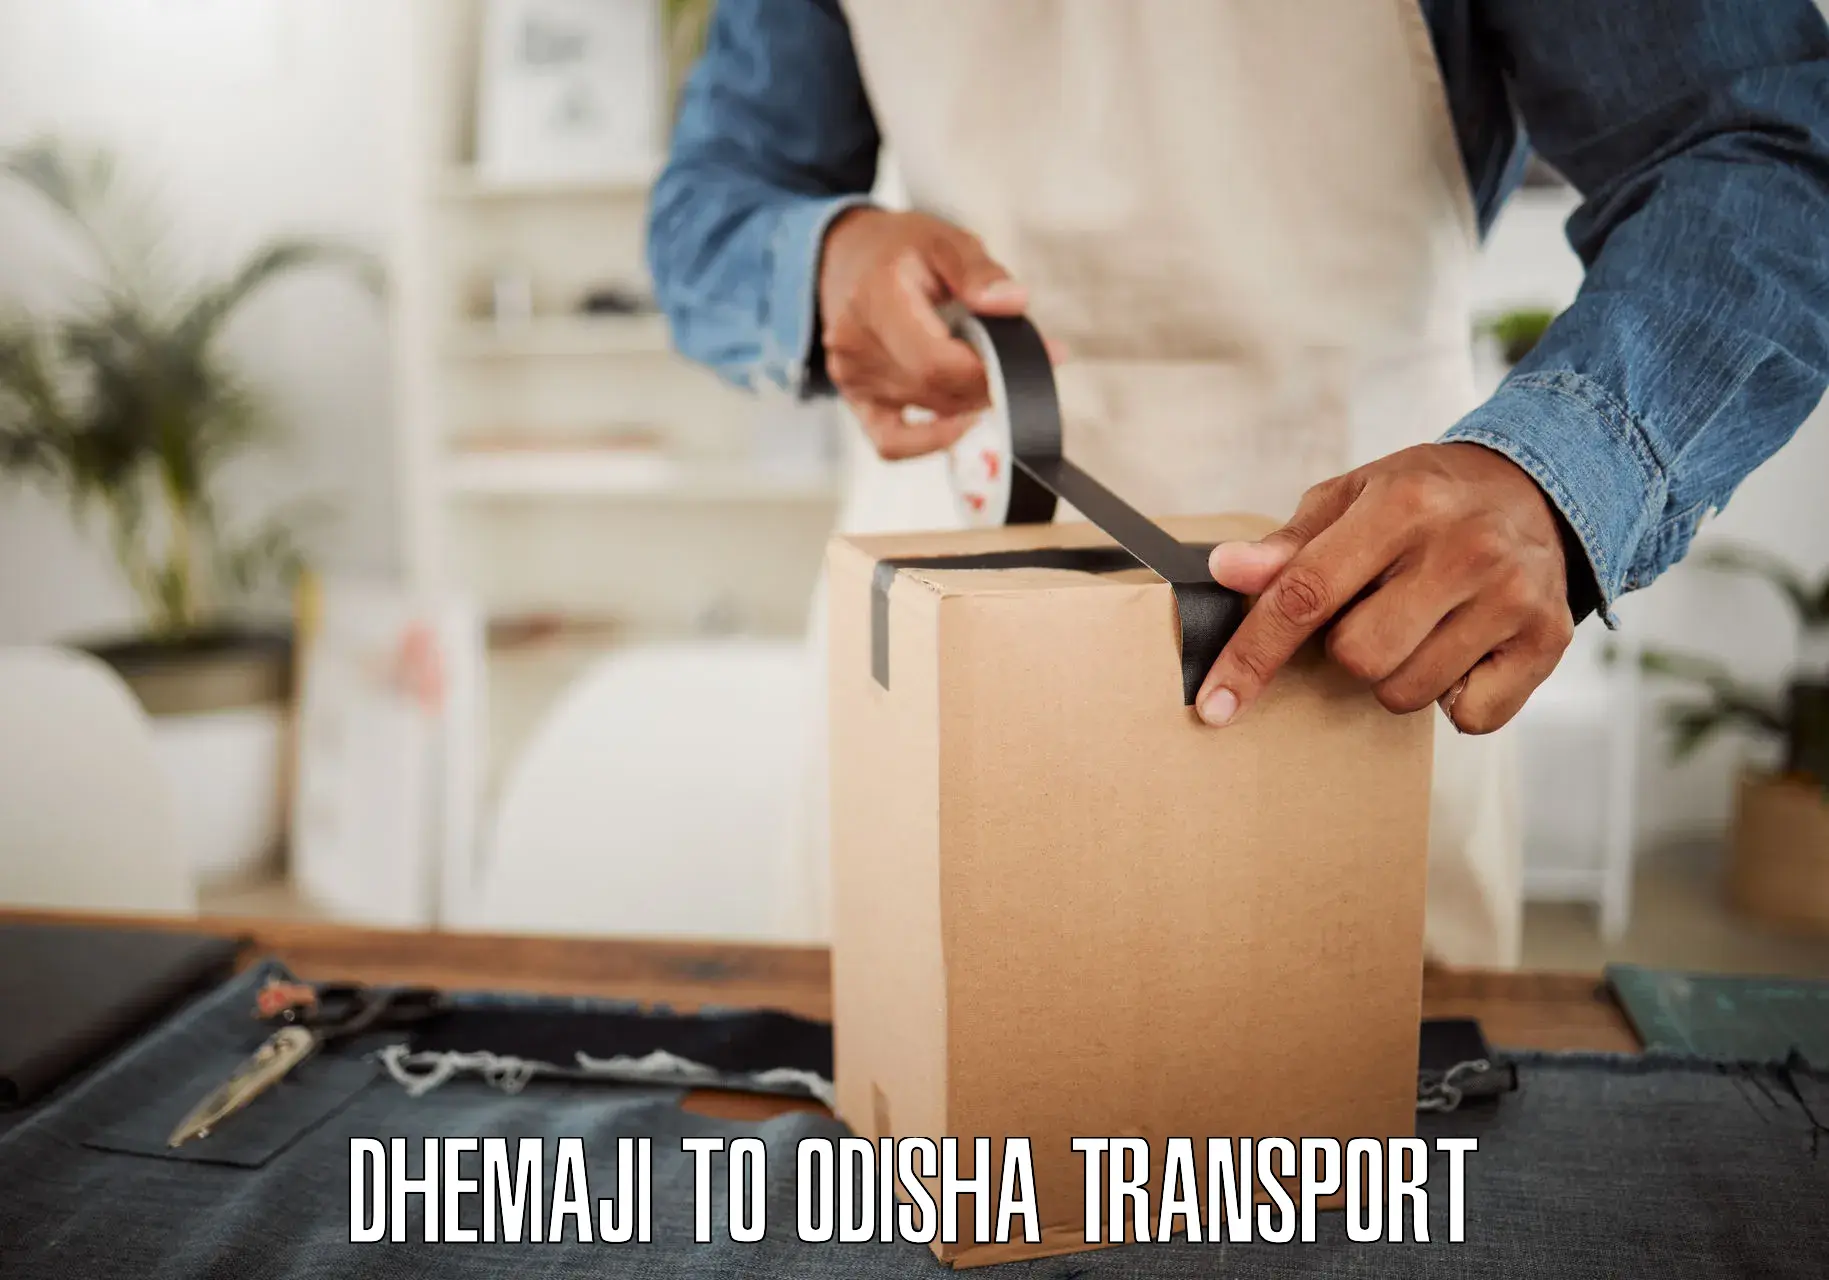 Goods delivery service Dhemaji to Ghuntagadia